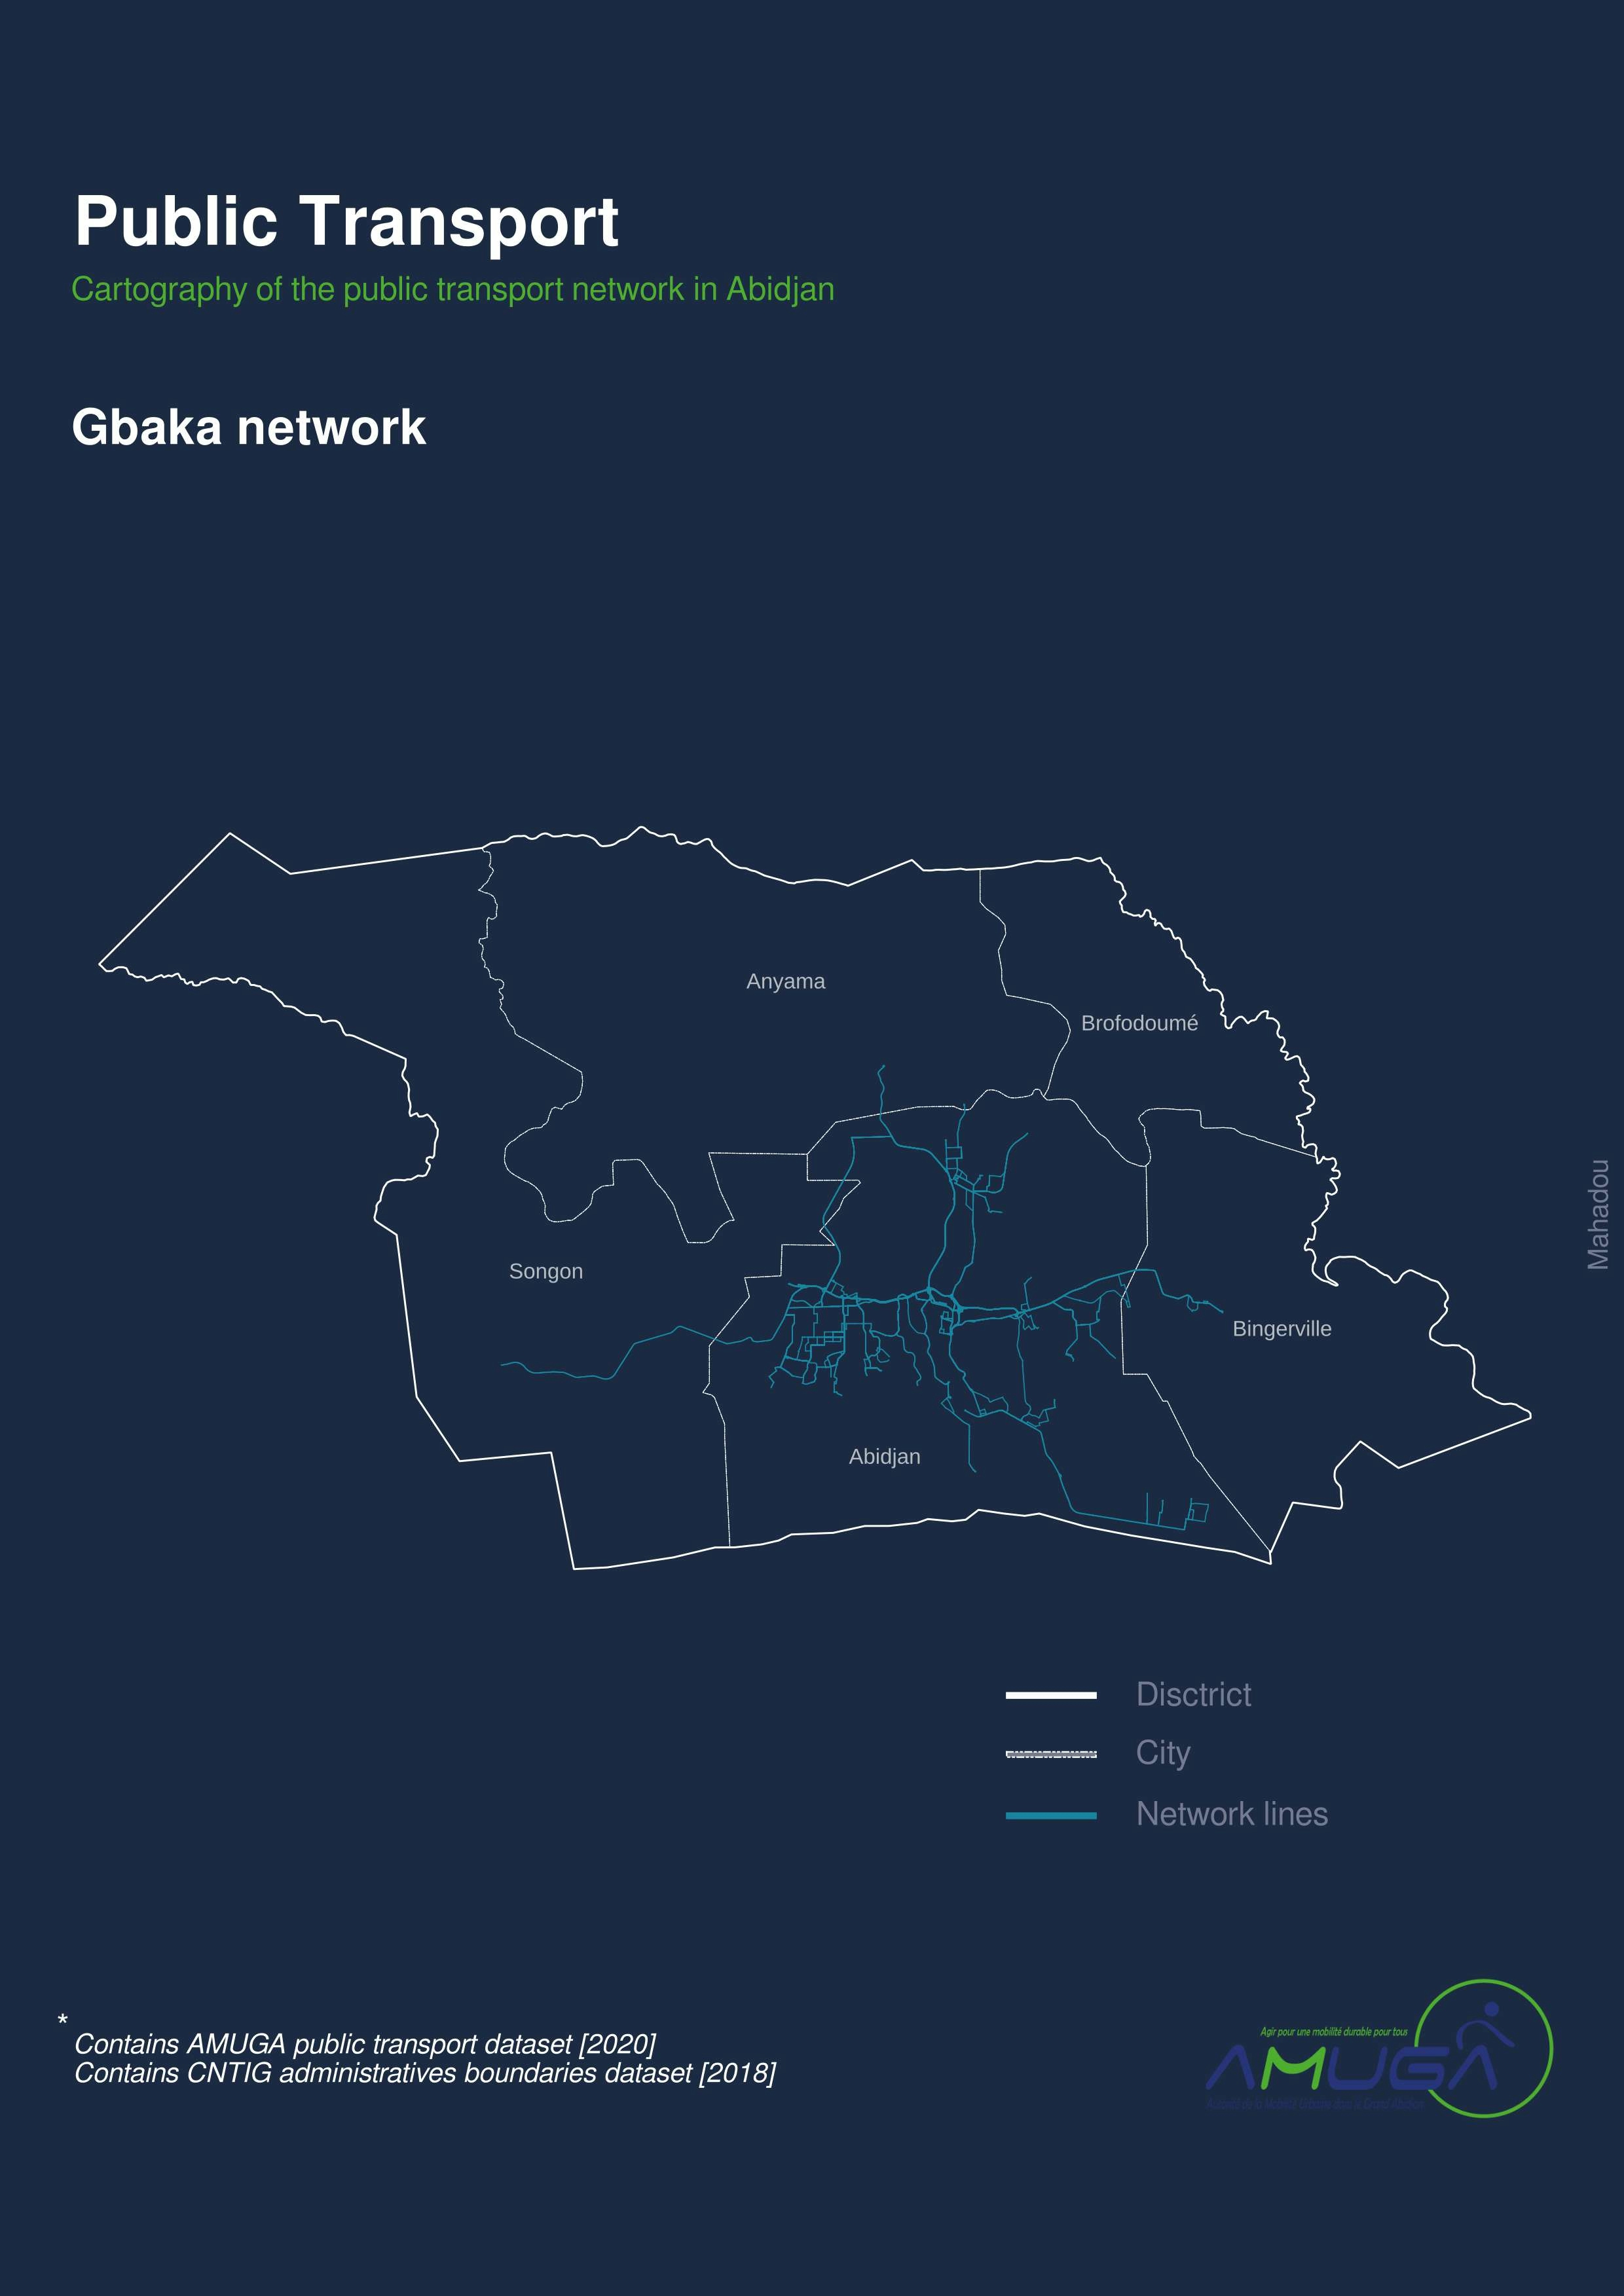 Cartography of public transport network